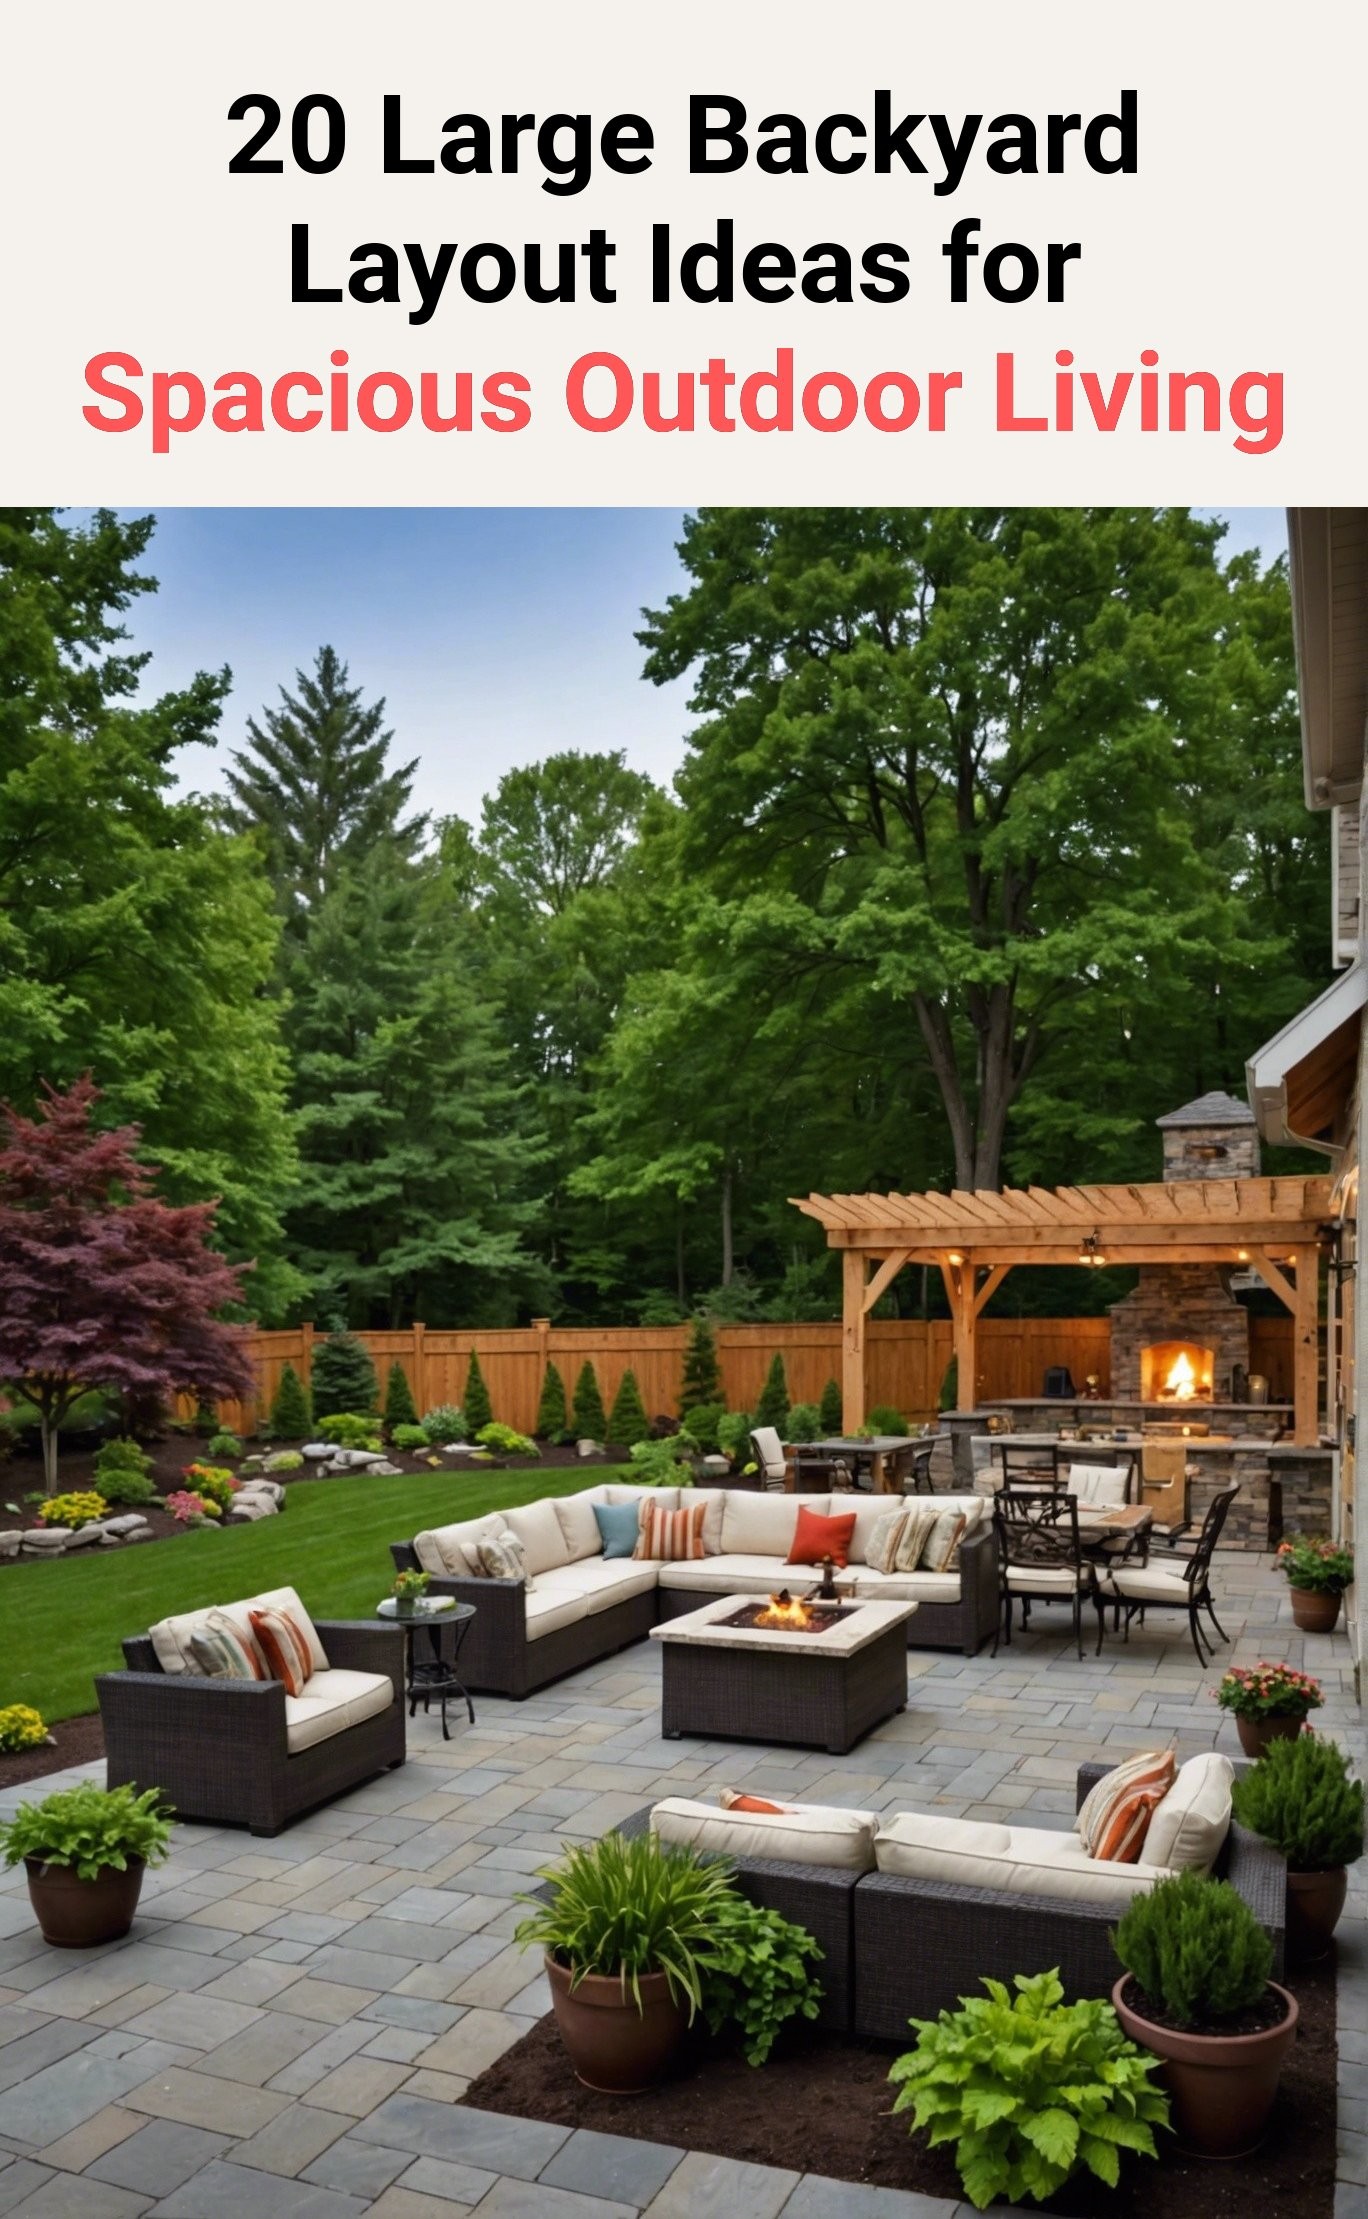 20 Large Backyard Layout Ideas for Spacious Outdoor Living